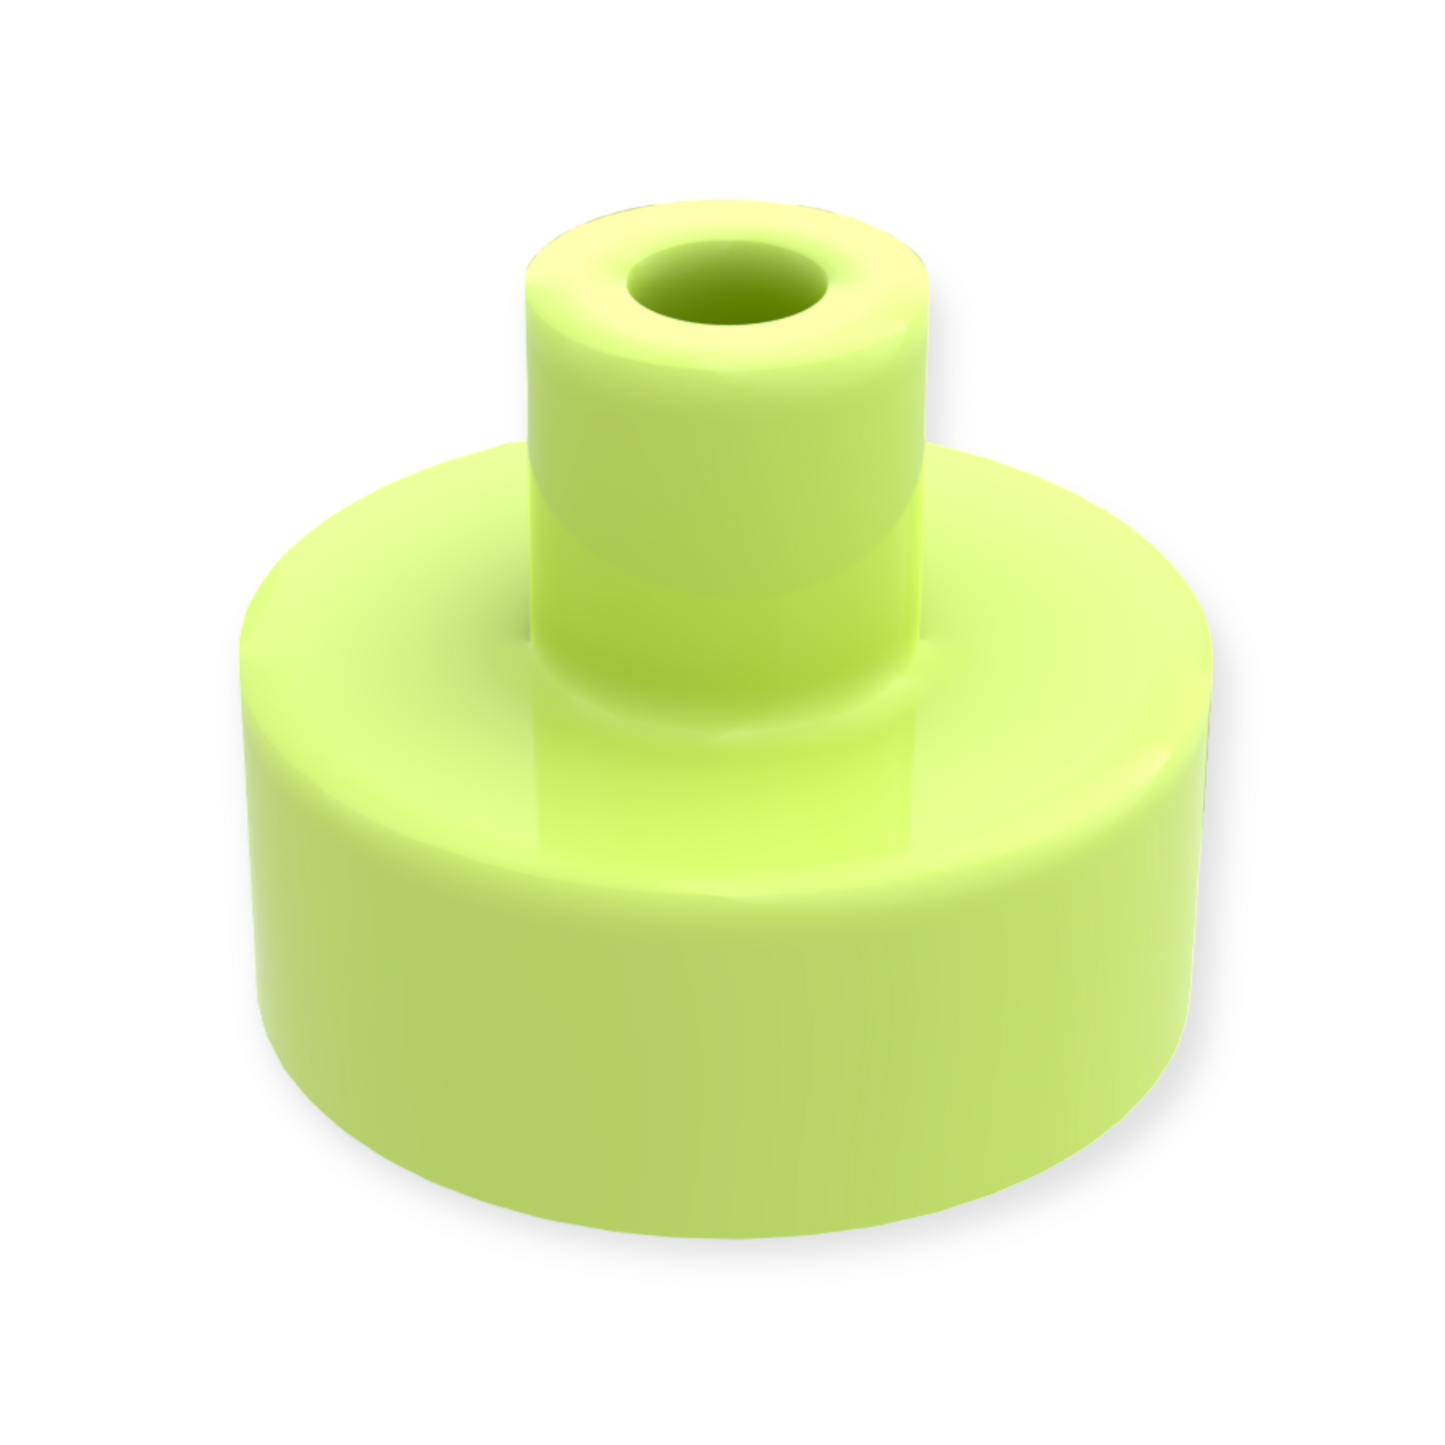 LEGO Tile Round 1x1 with Bar and Pin Holder - Yellowish Green